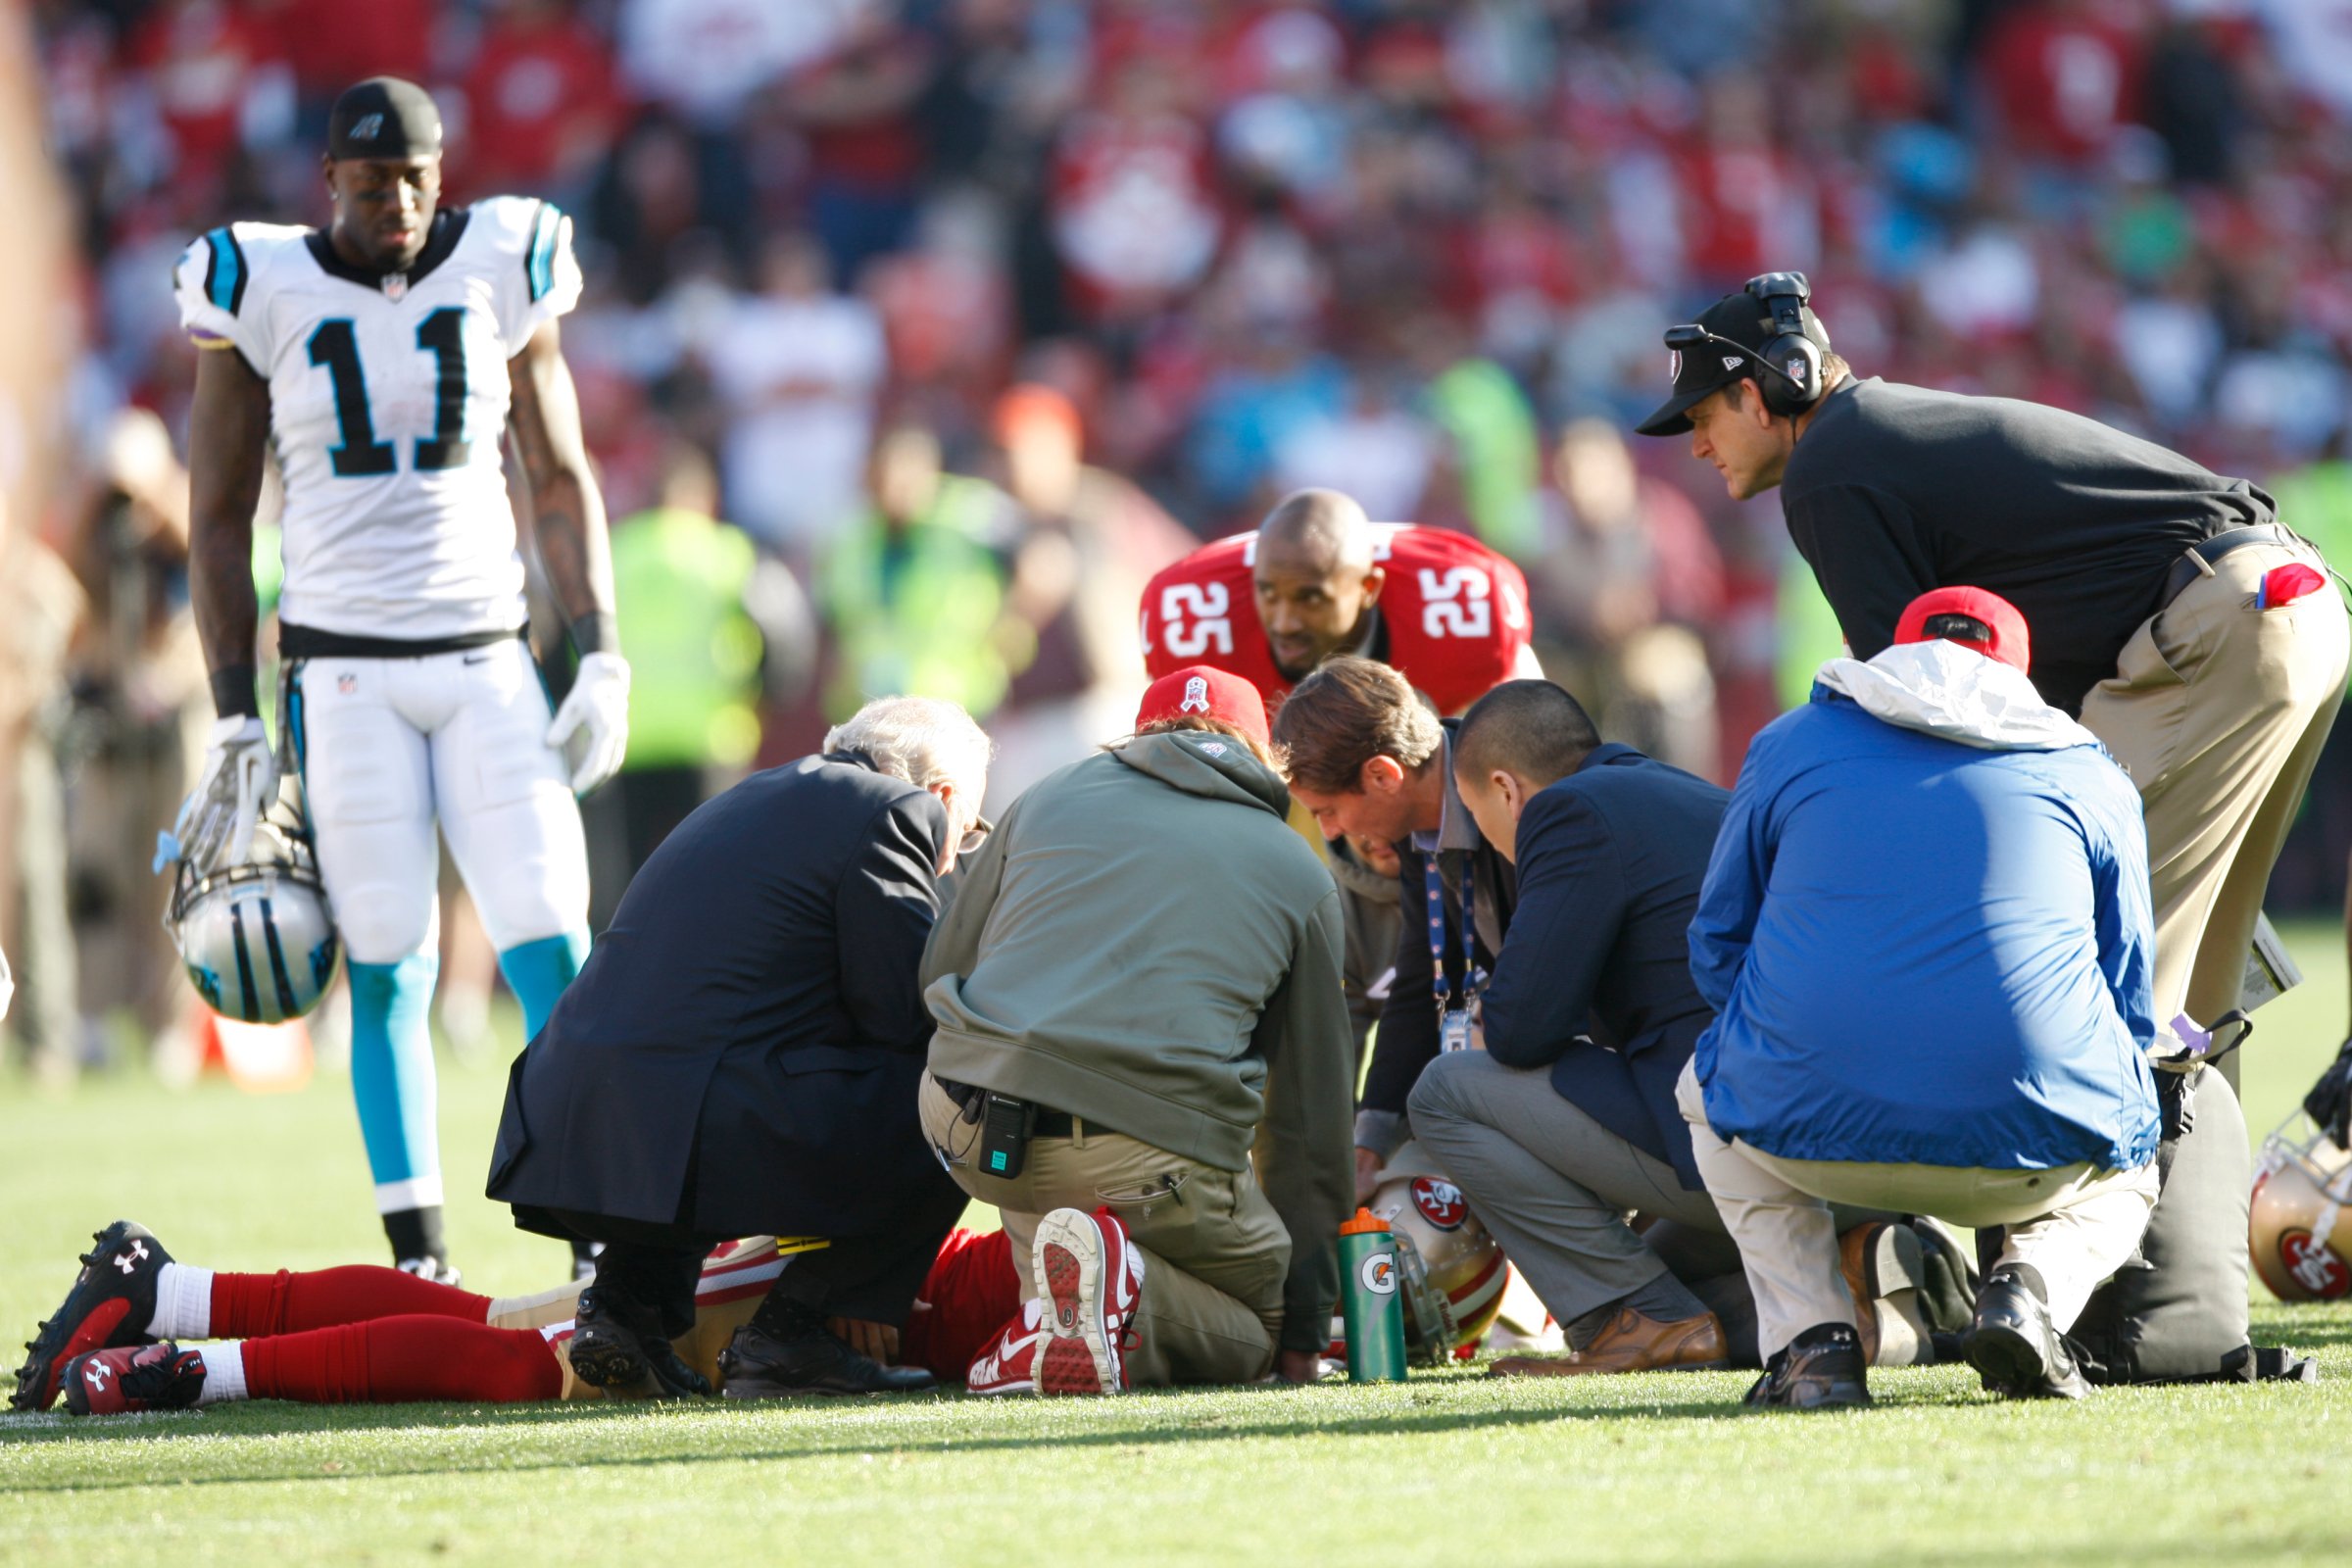 From left: Head Coach Jim Harbaugh of the San Francisco 49ers and the medical staff check out Eric Reid after he received a concussion during the game against the Carolina Panthers on November 10, 2013 in San Francisco, California.